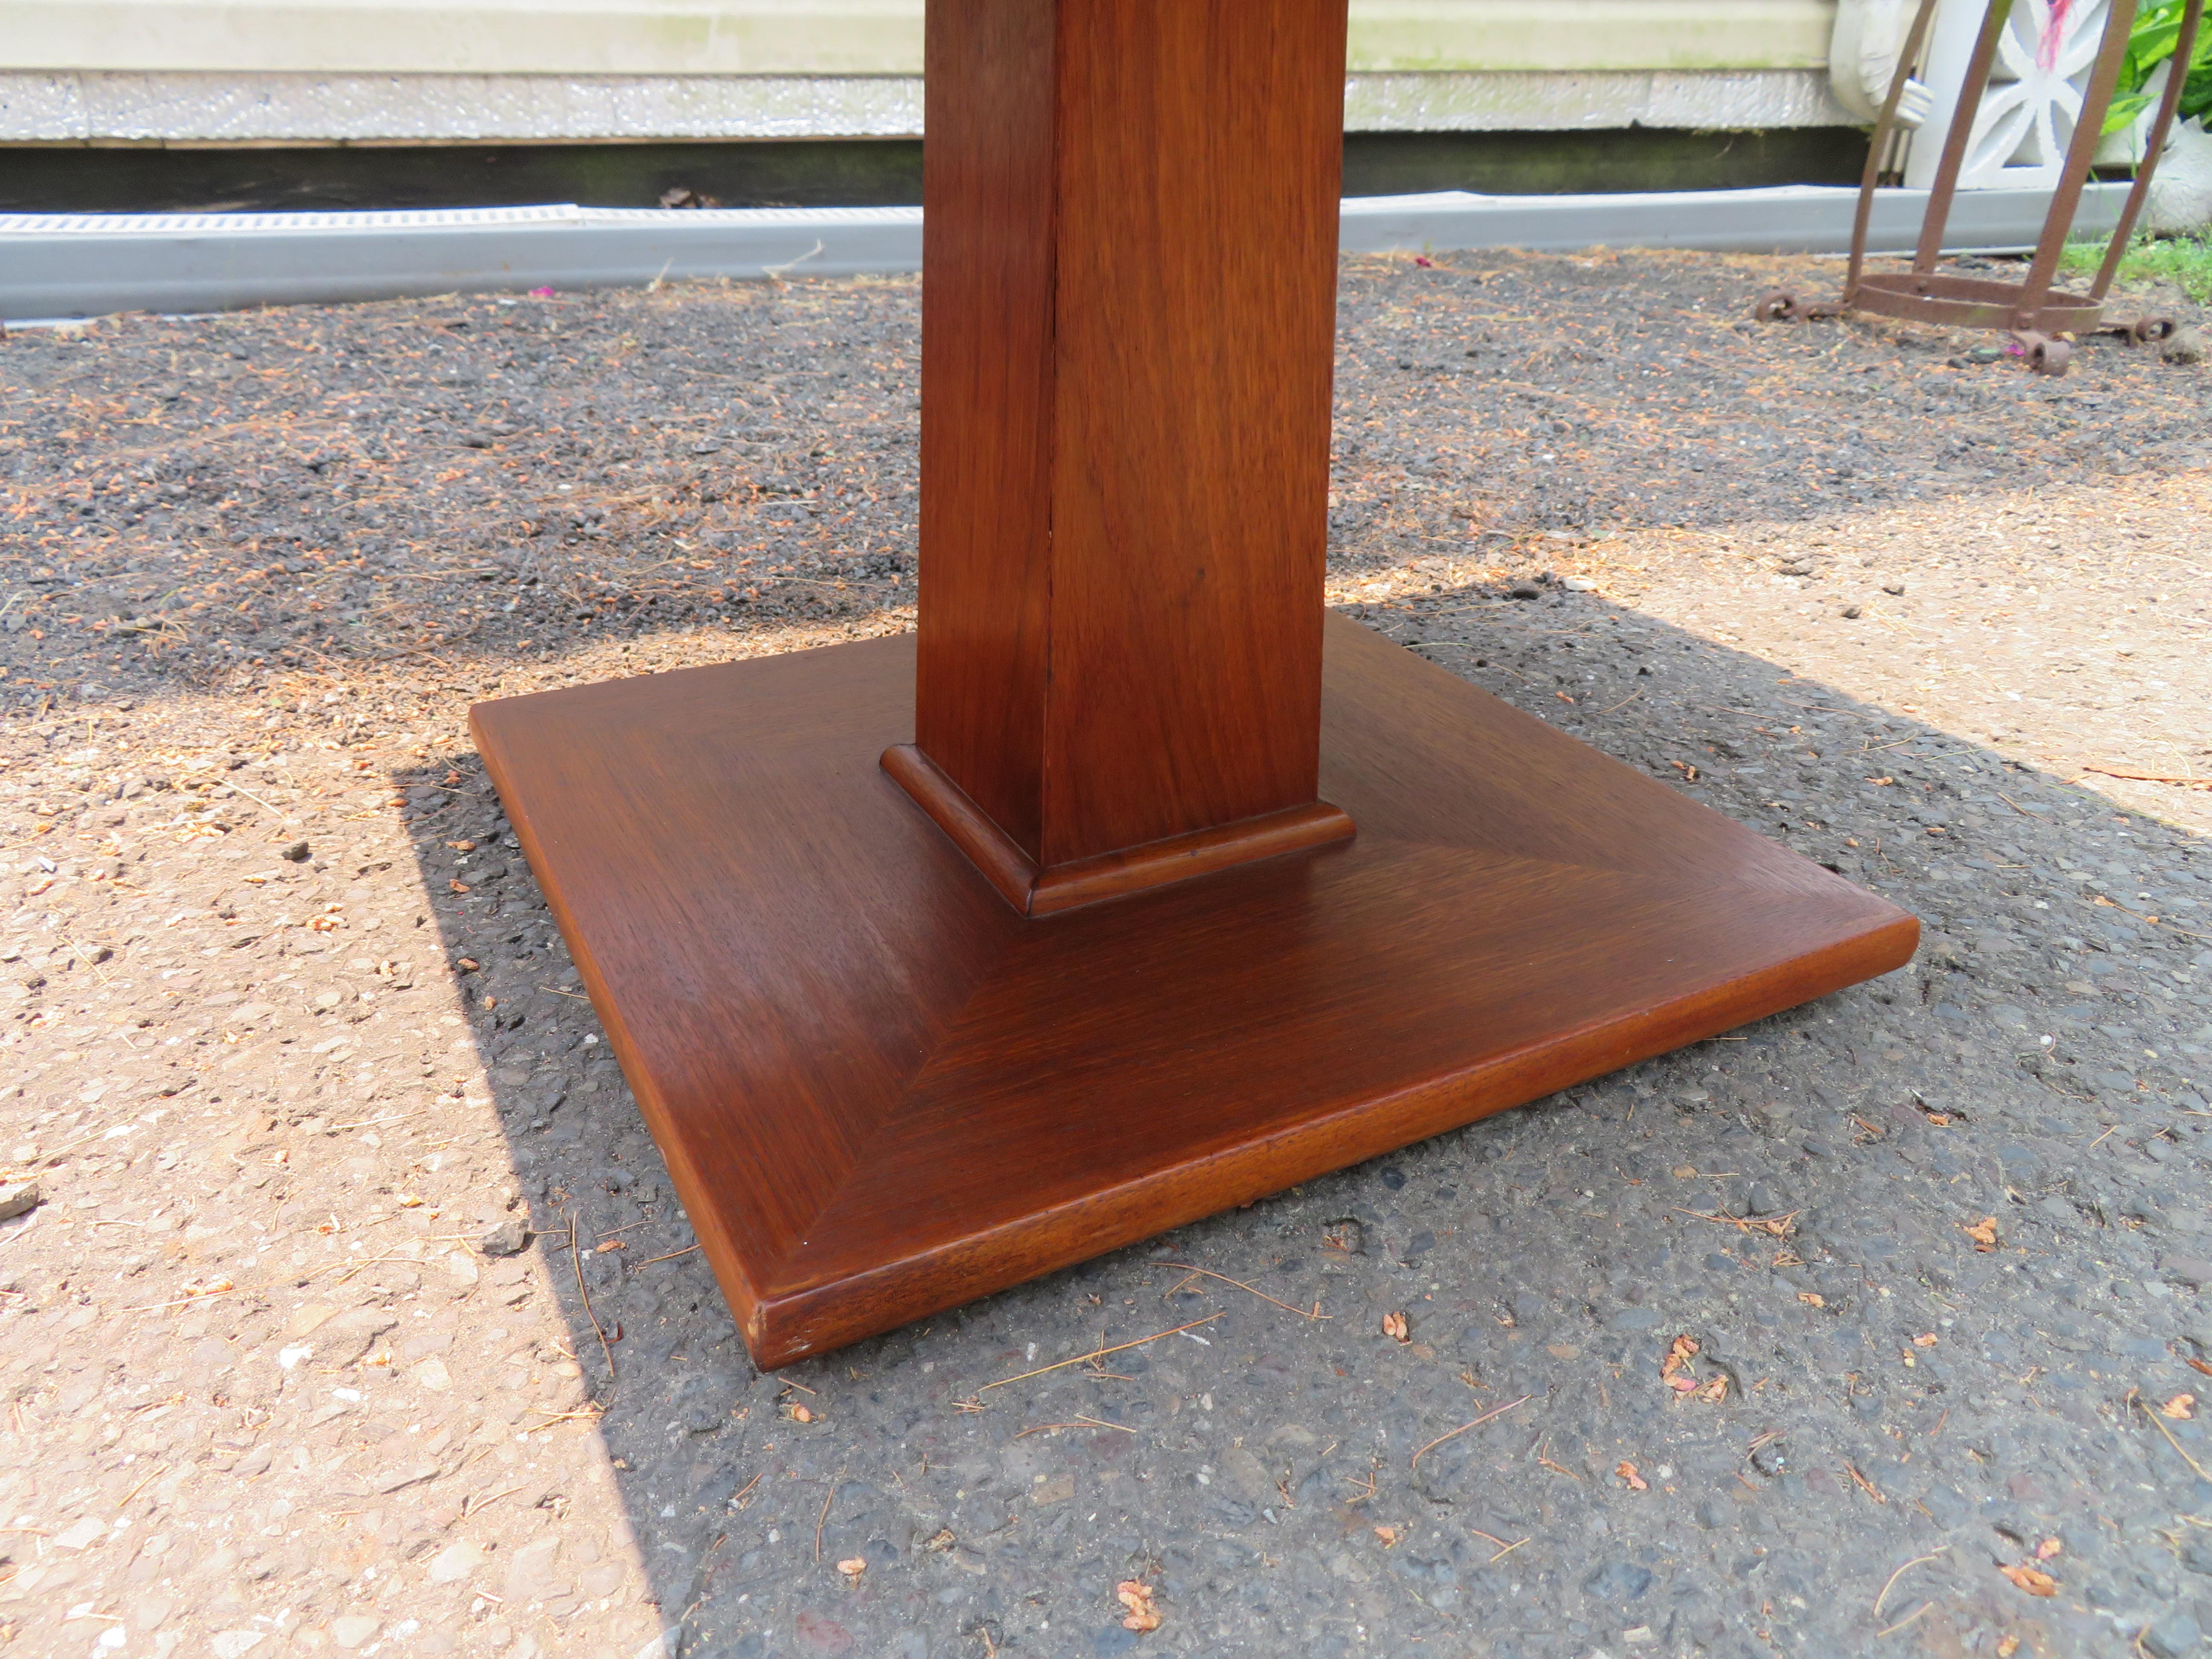 Magnificent John Widdicomb Square Coffee Side Table Mid-Century Modern In Good Condition For Sale In Pemberton, NJ